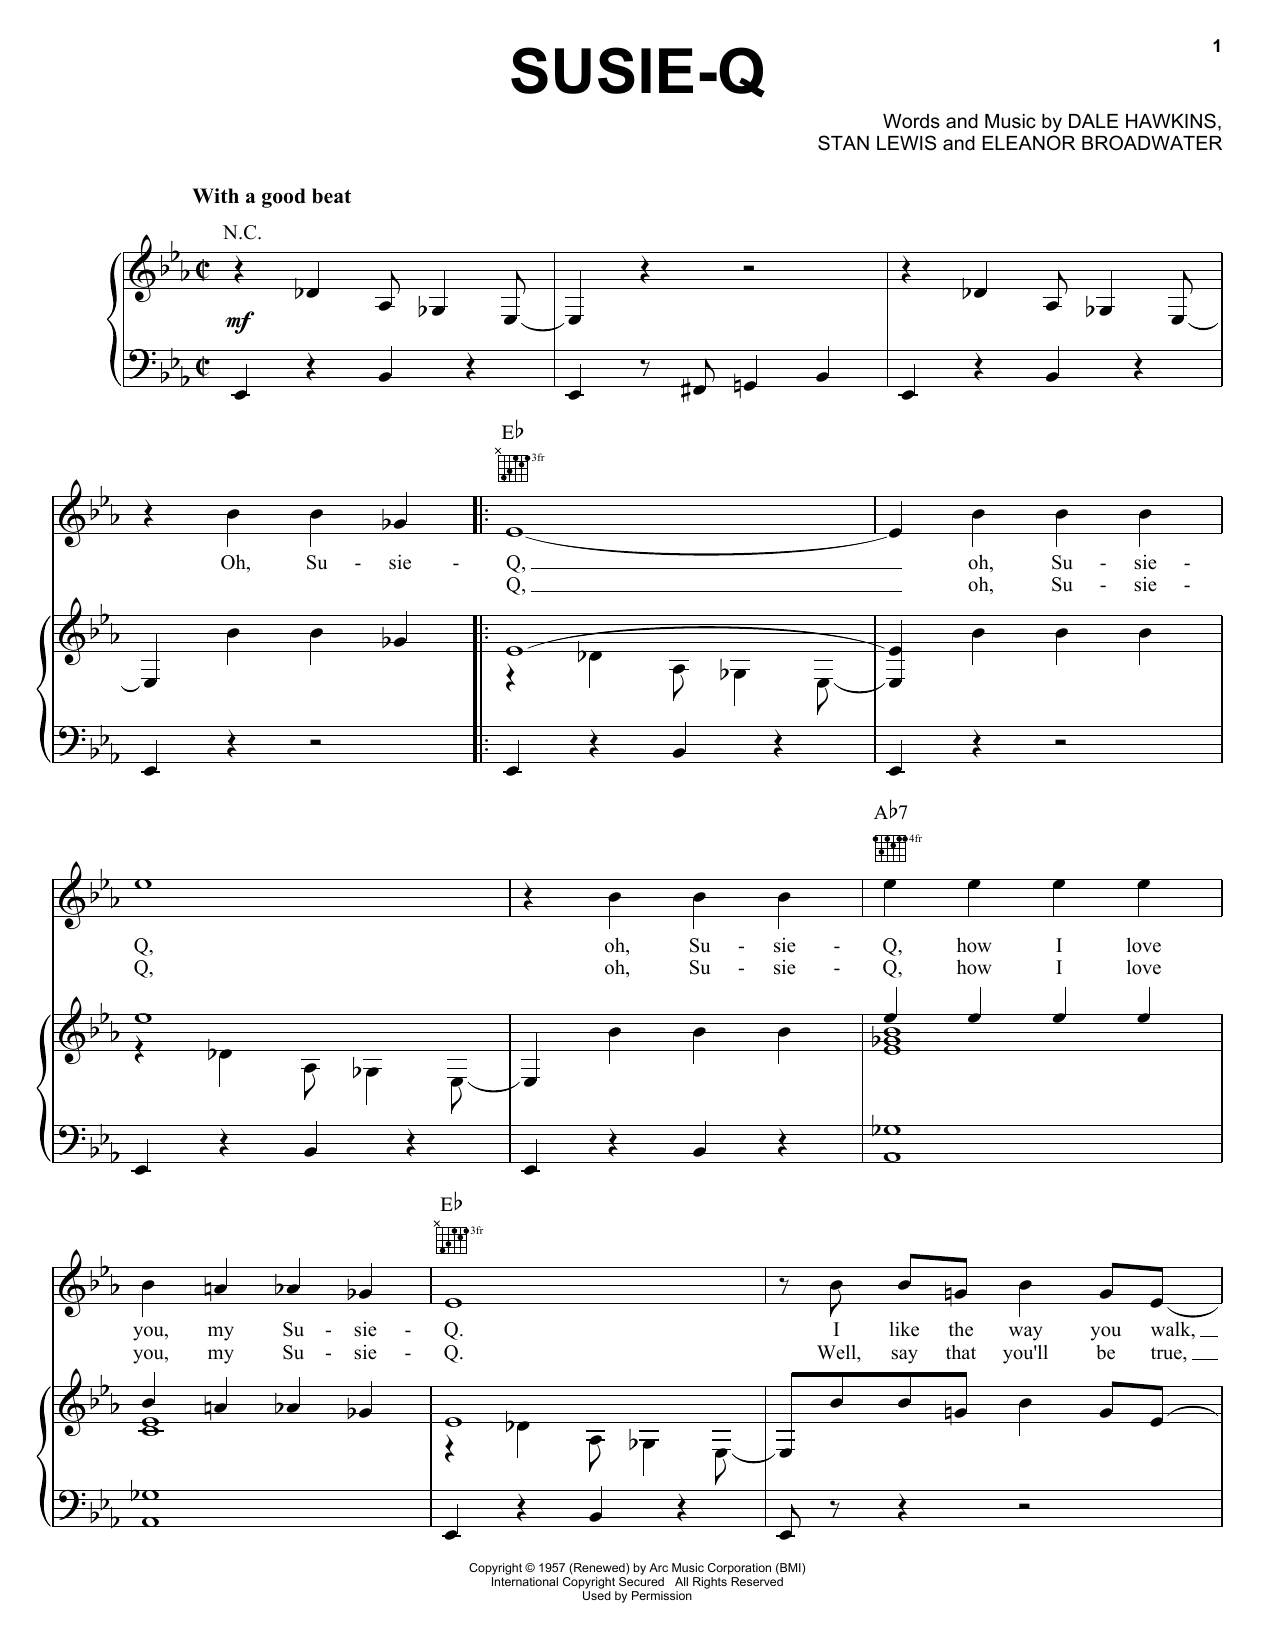 Download Creedence Clearwater Revival Susie-Q sheet music notes and chords for Piano, Vocal & Guitar (Right-Hand Melody) - Download Printable PDF and start playing in minutes.